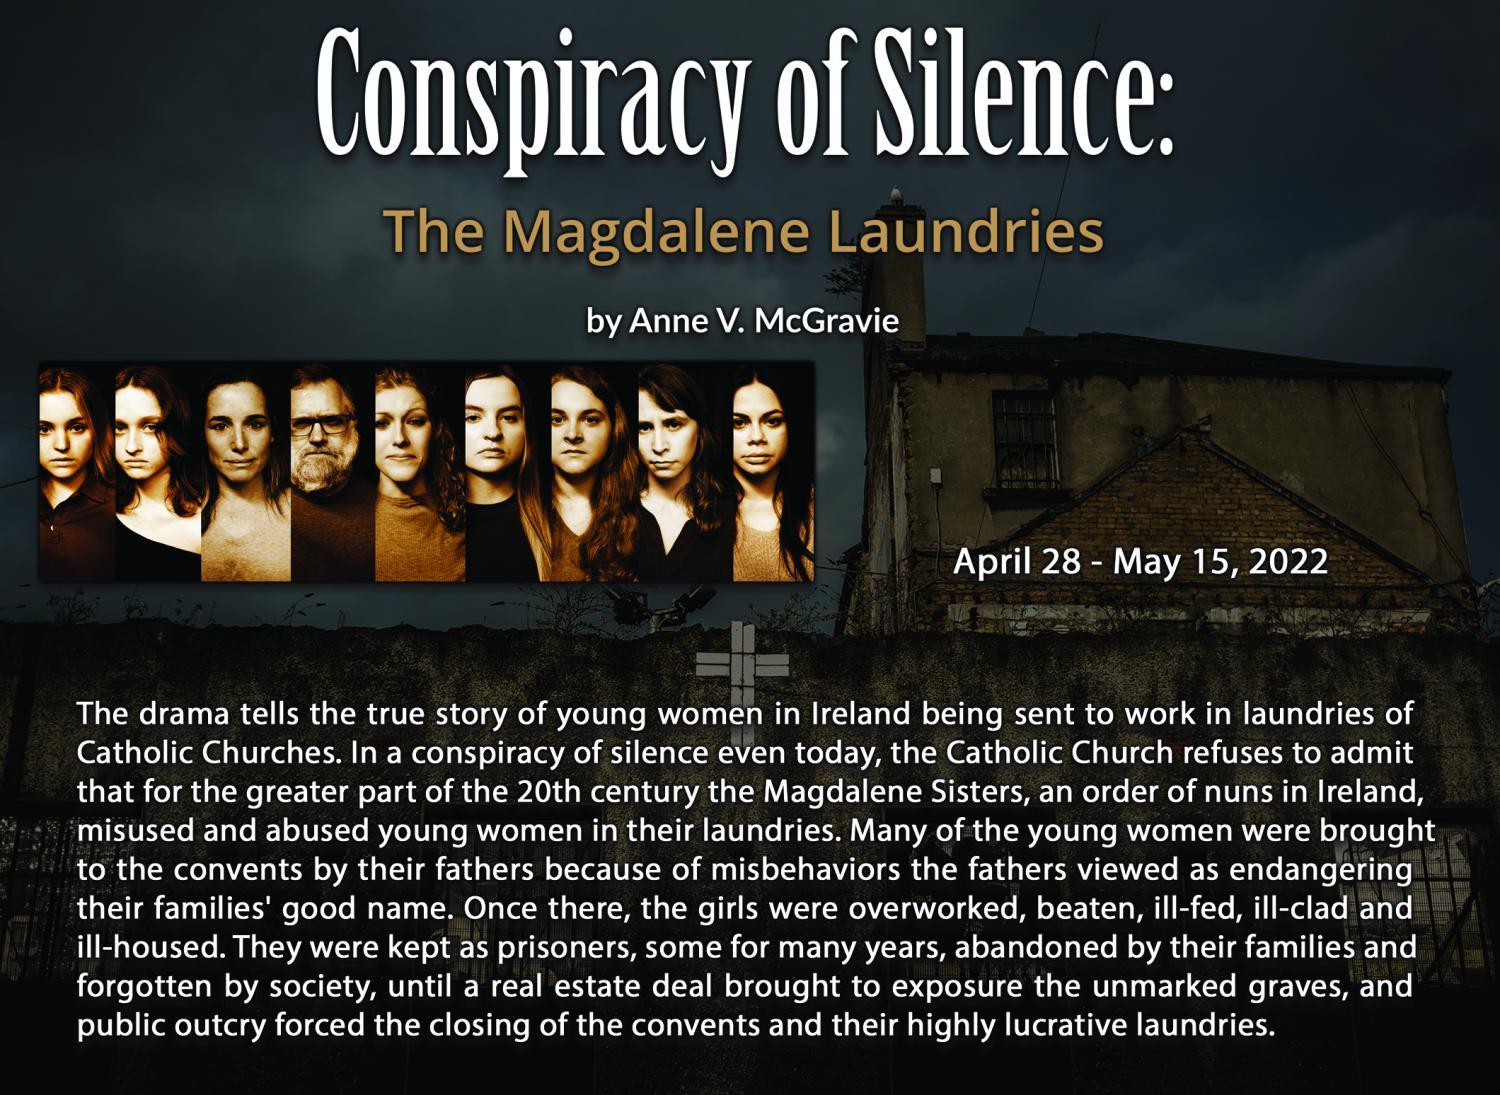 Conspiracy of Silence: The Magdalene Laundries